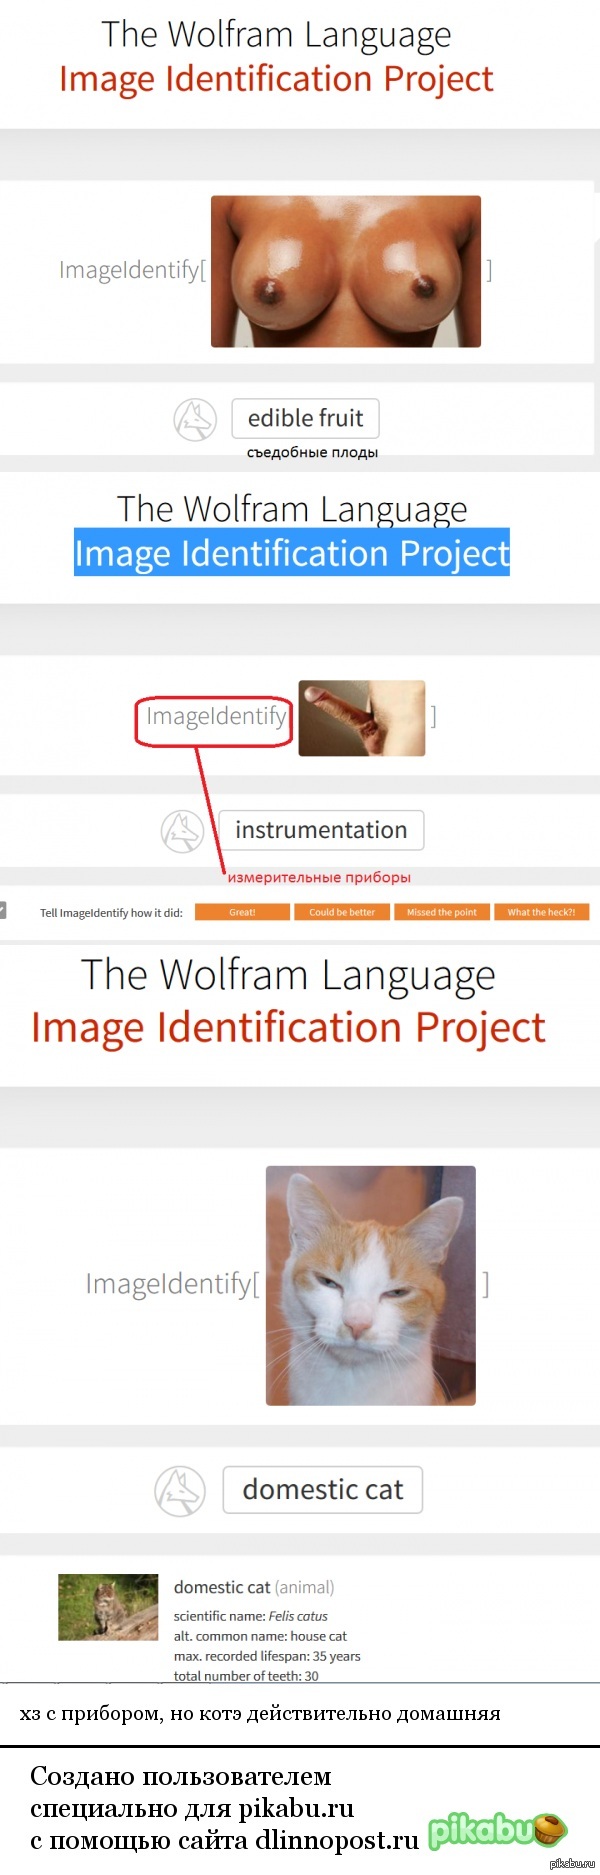 image recognition system + translate google - NSFW, cat, Measuring instruments, Esculent